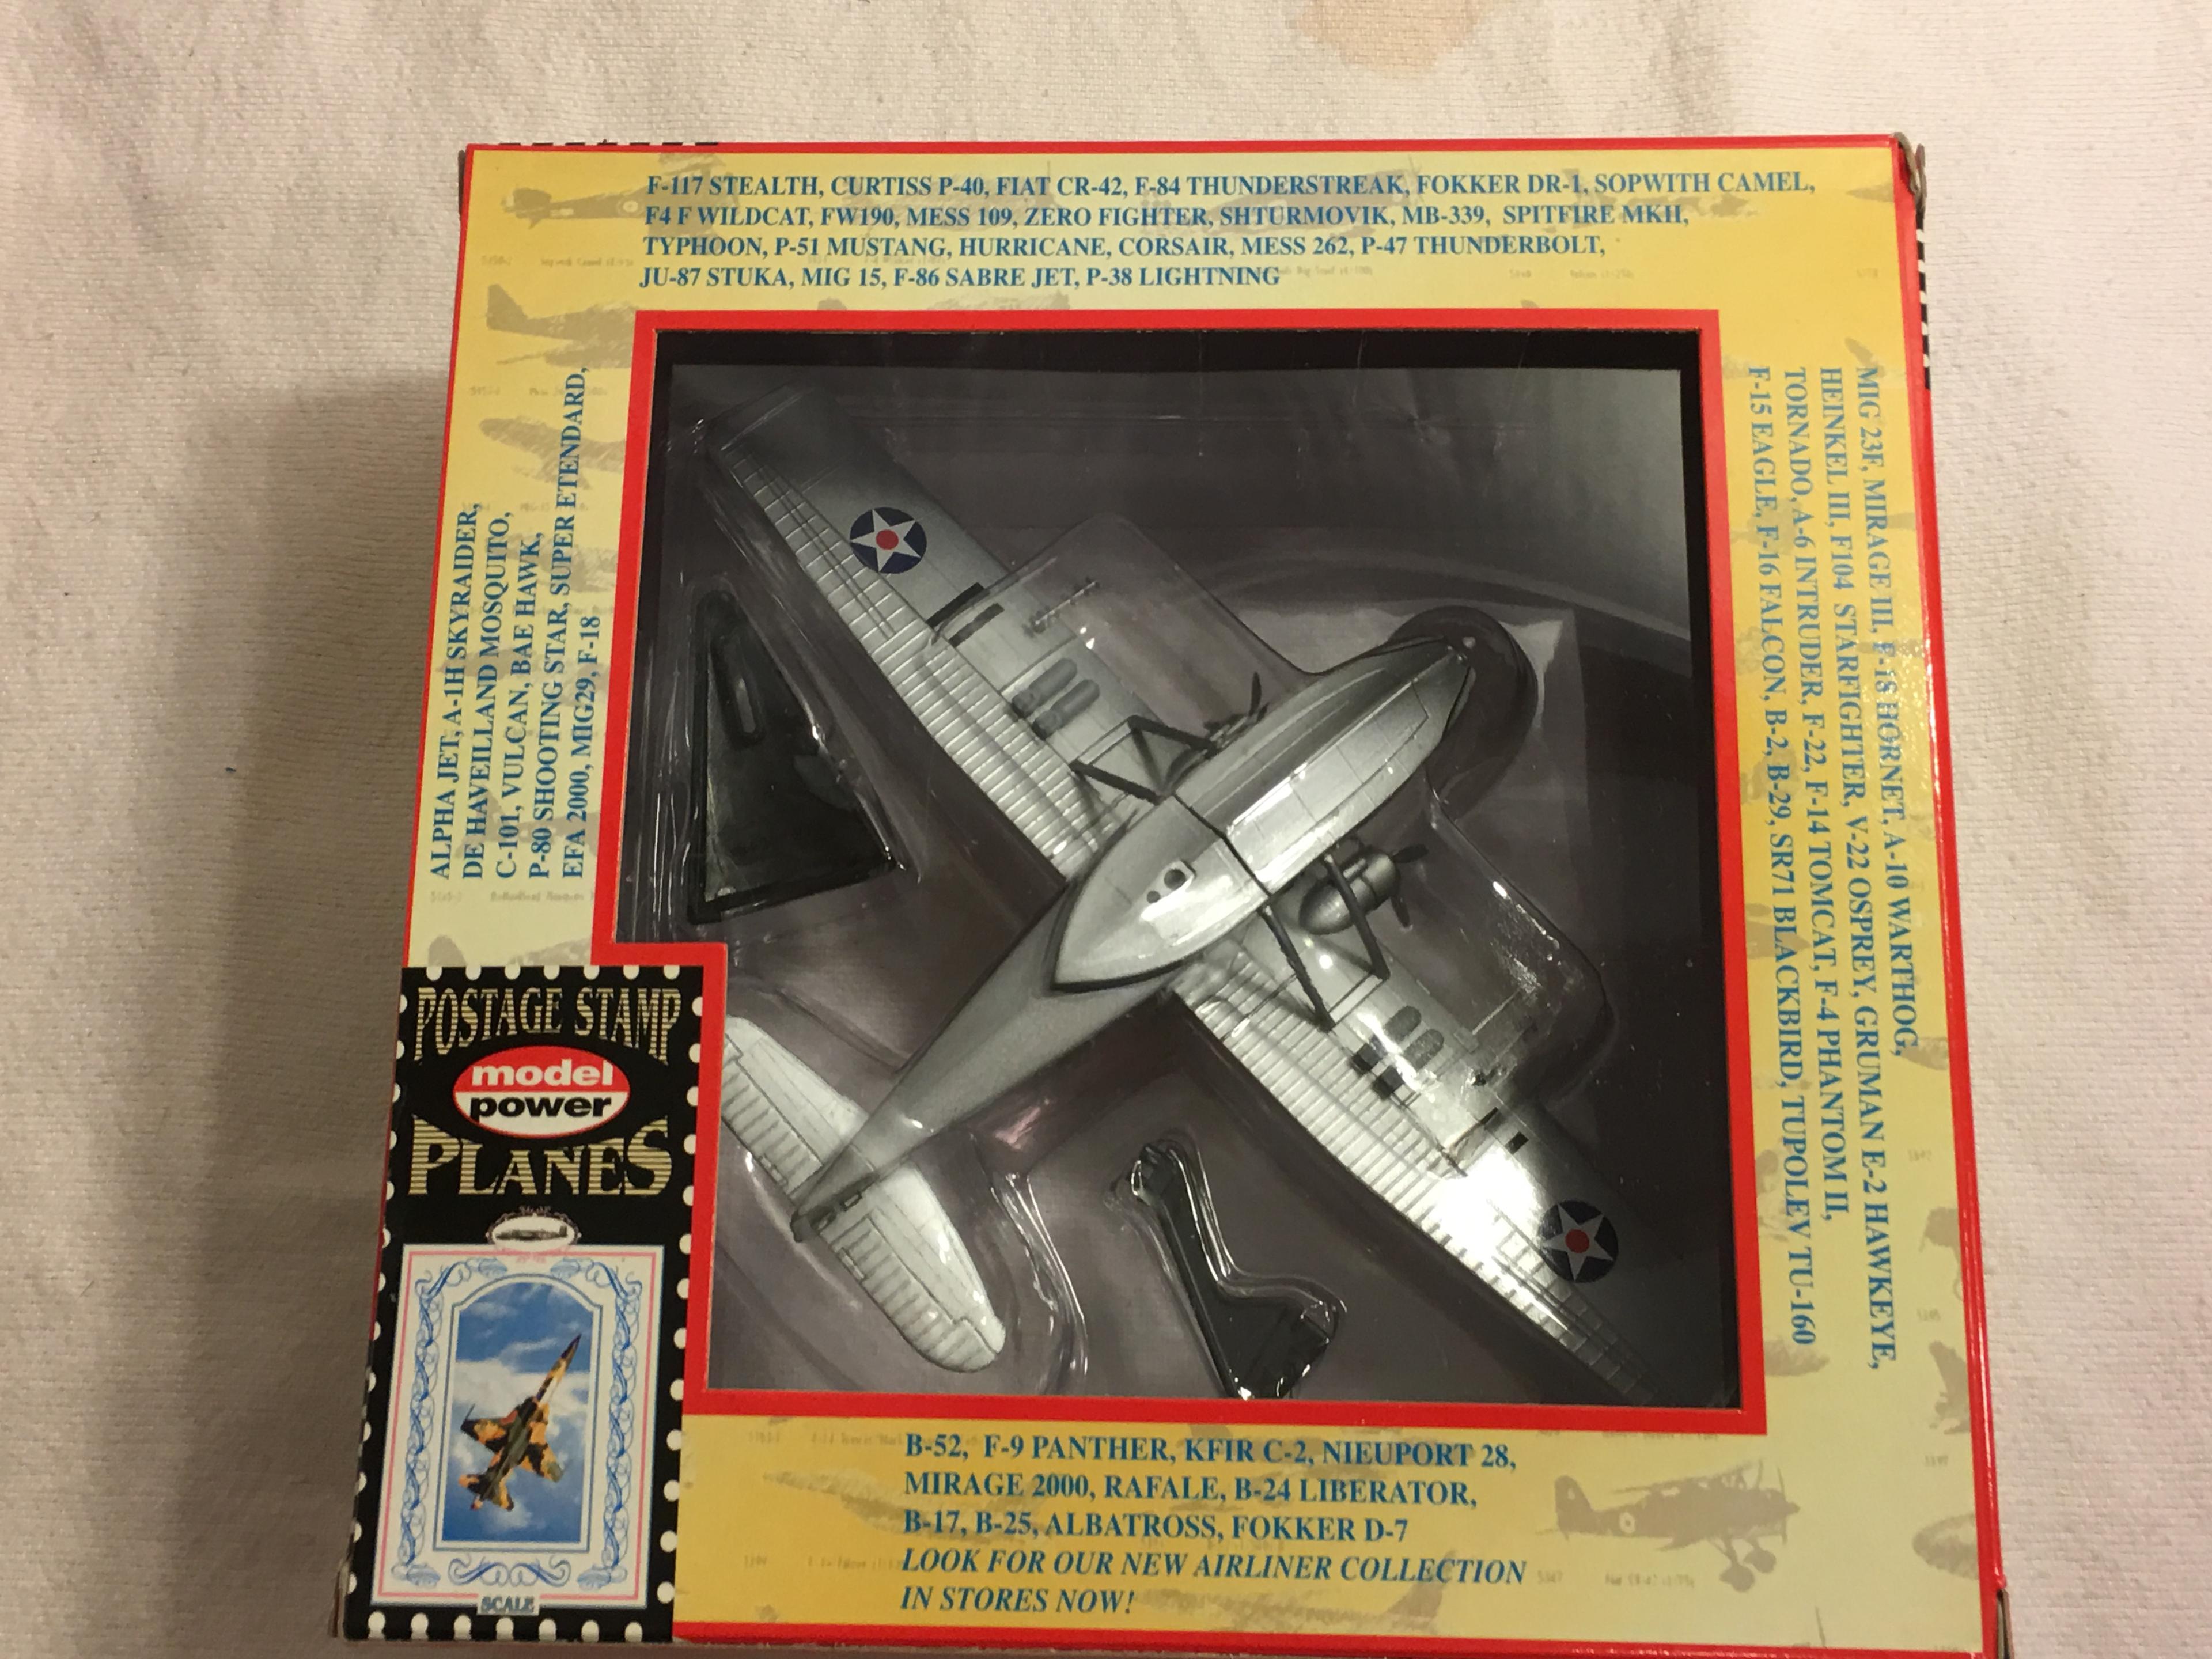 Collector Model Power Postage Stamp Planes PBY-5 Catalina Die Cast Plane w/ Stand Box: 8"x8"